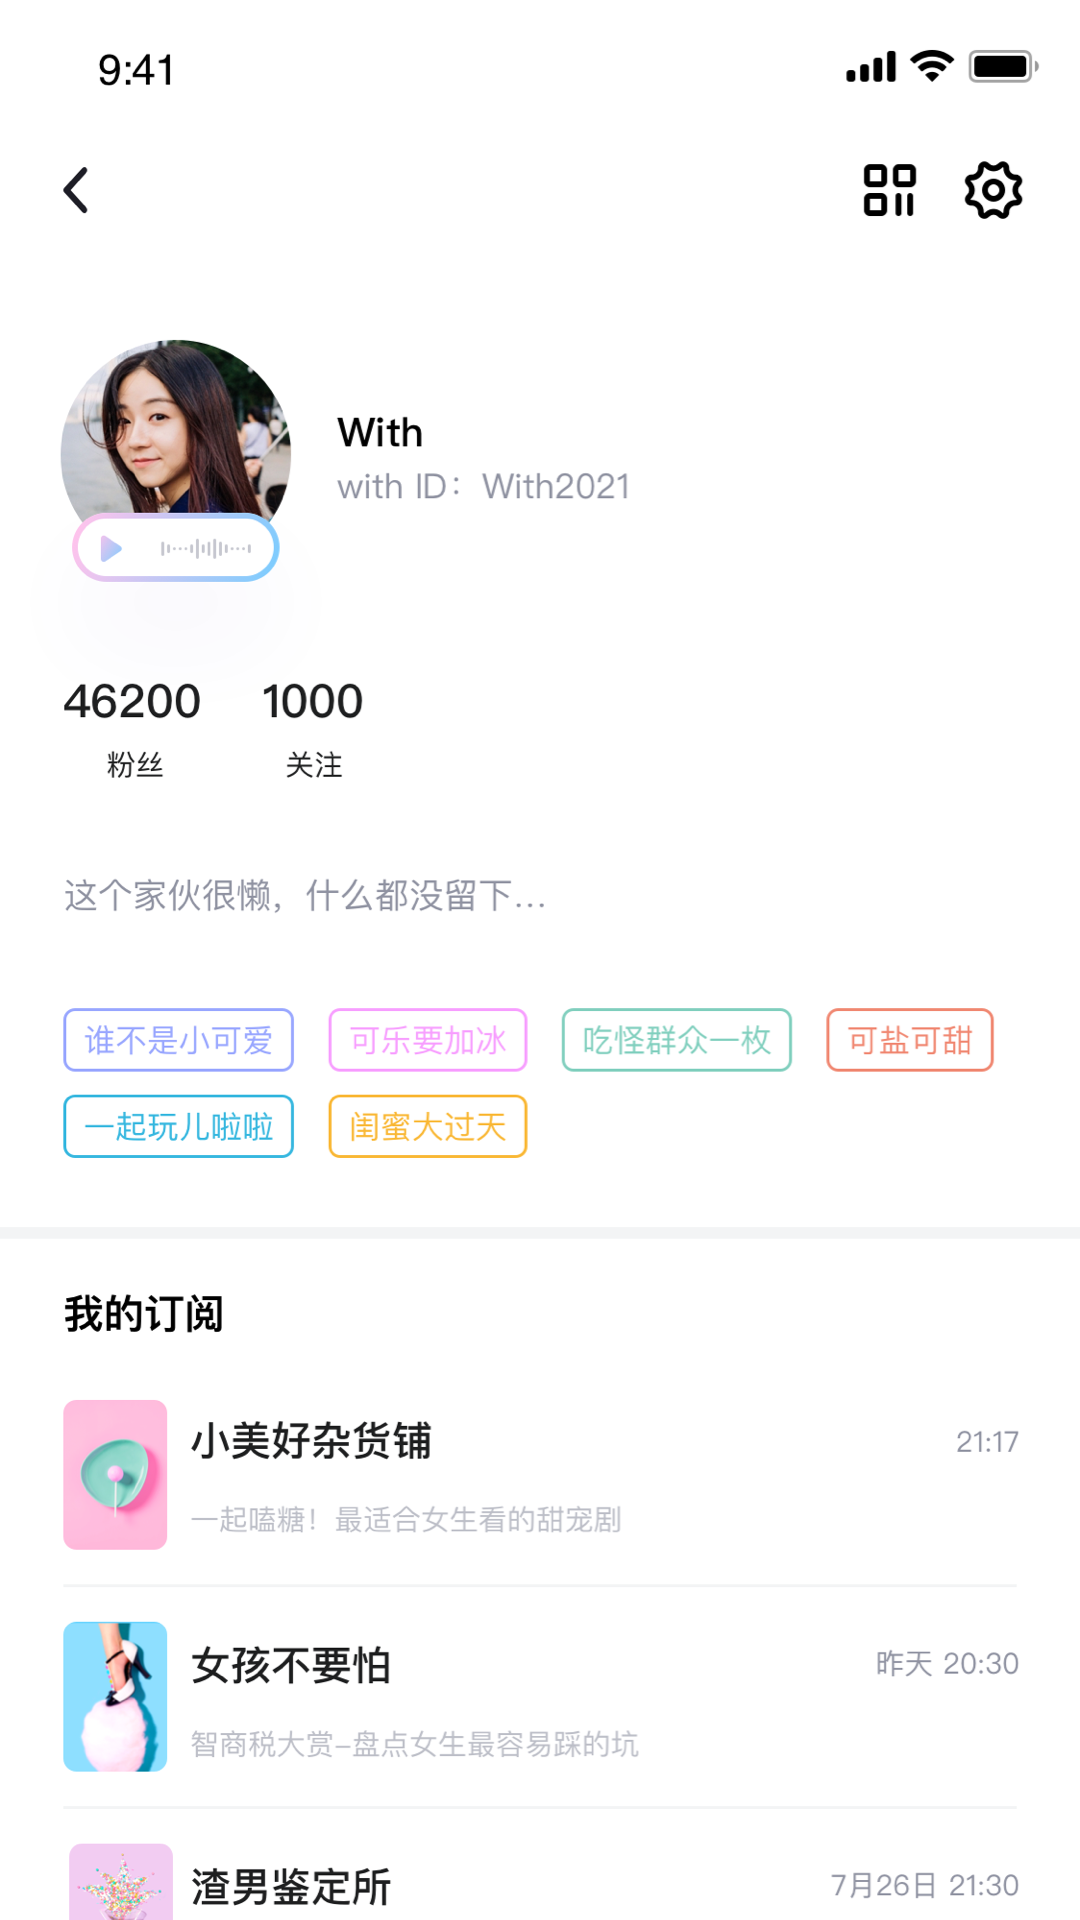 Withappٷv1.0.9 ֻ